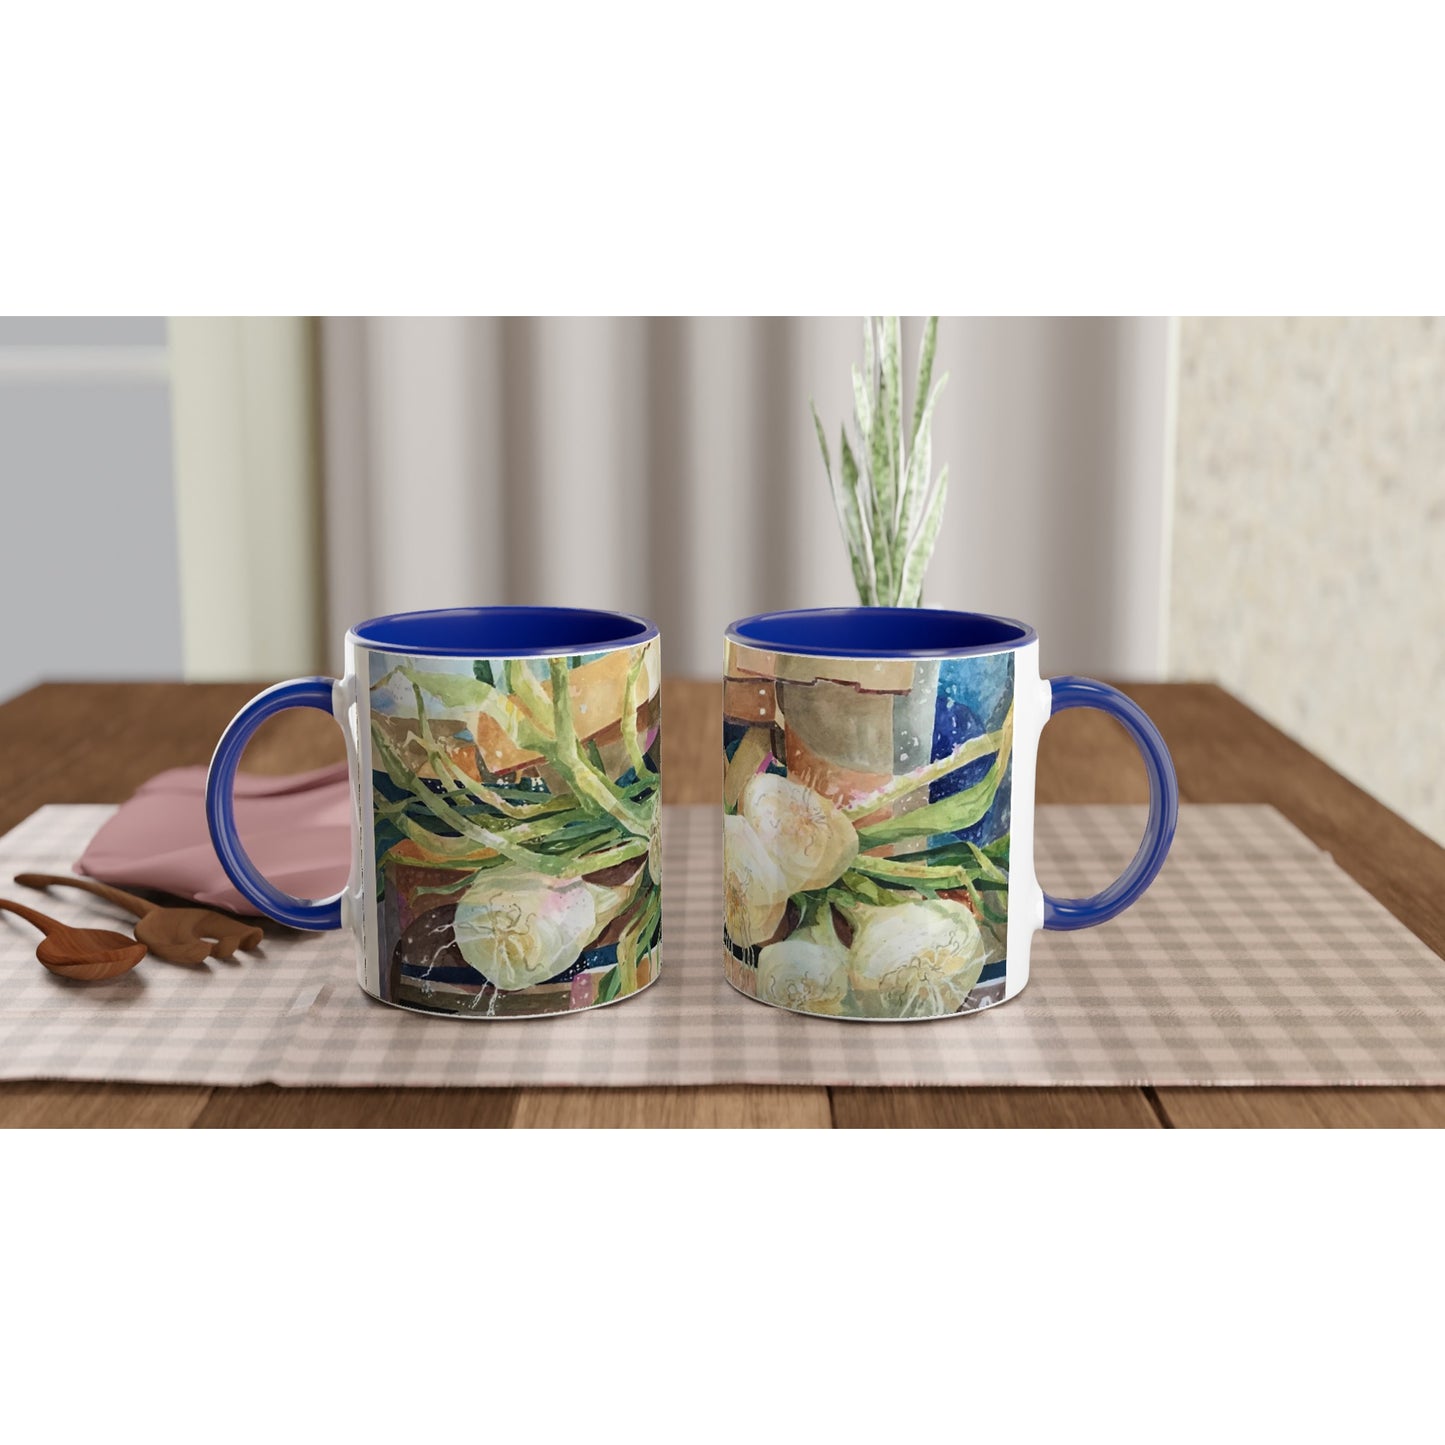 "Onions Watercolor" White 11oz Ceramic Mug with Color Inside by Barbara Cleary Designs